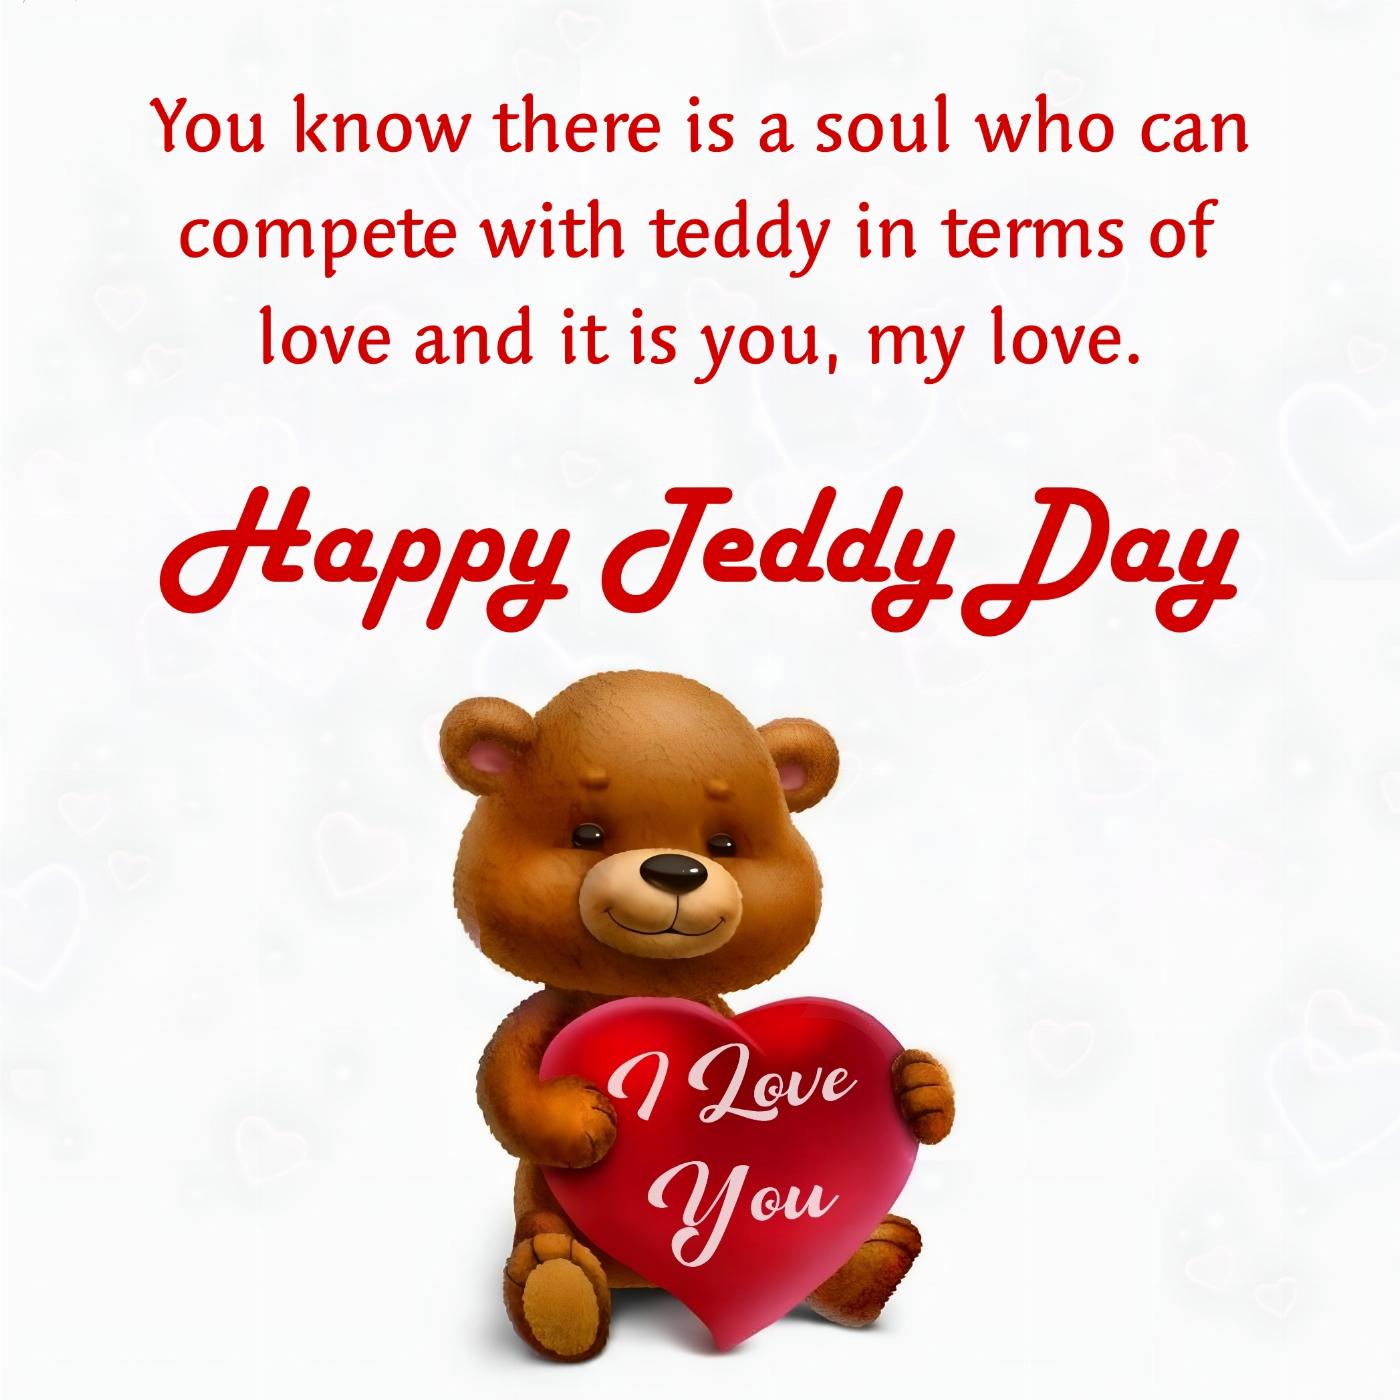 You know there is a soul who can compete with teddy